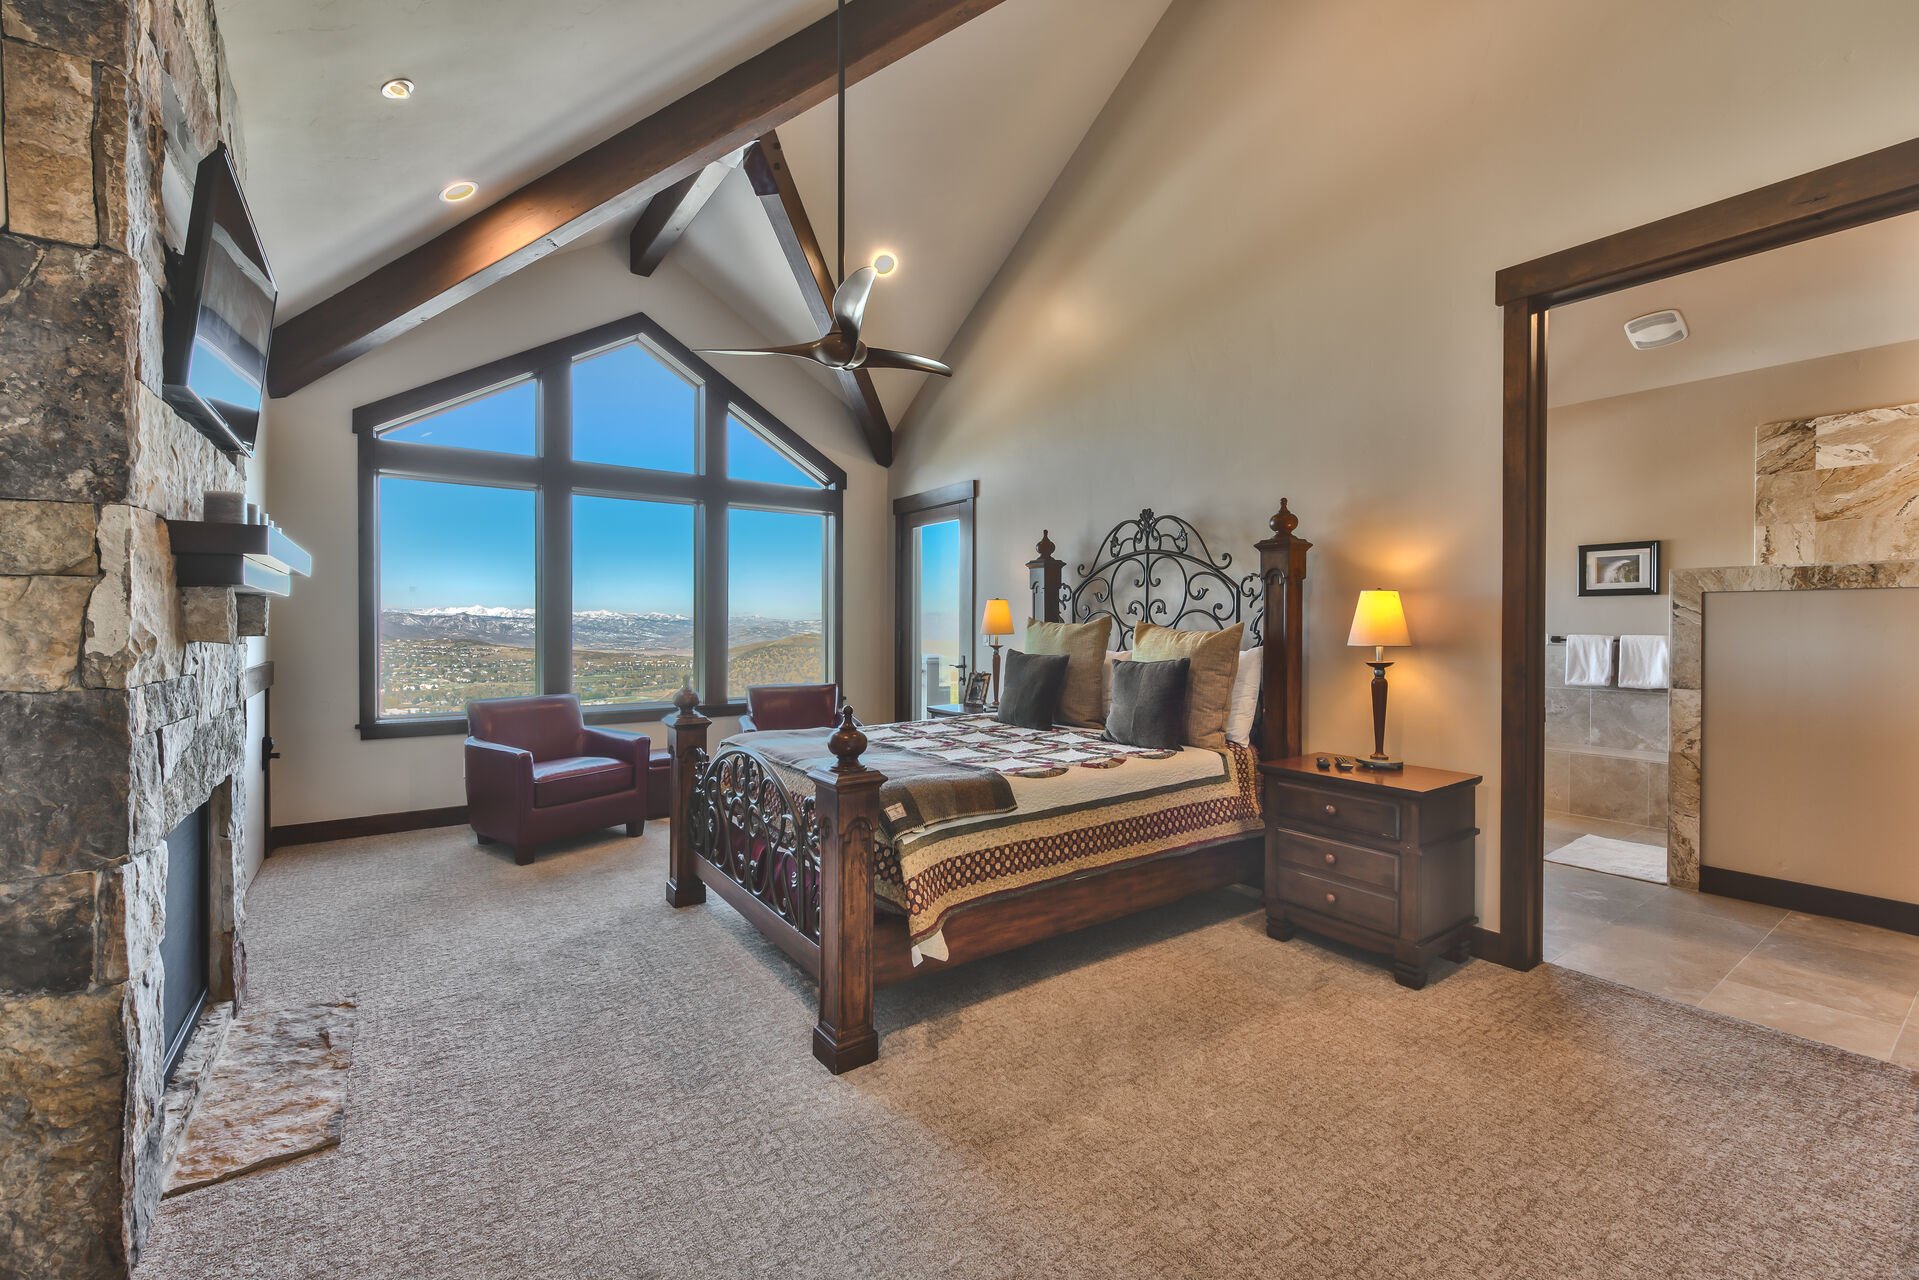 Master Suite 2 has a Queen Bed, a Large Walk-in Closet with a Twin Day Bed and Twin Trundle, Both with Memory Foam Mattresses, a Private Bath and Patio, and Stunning Views